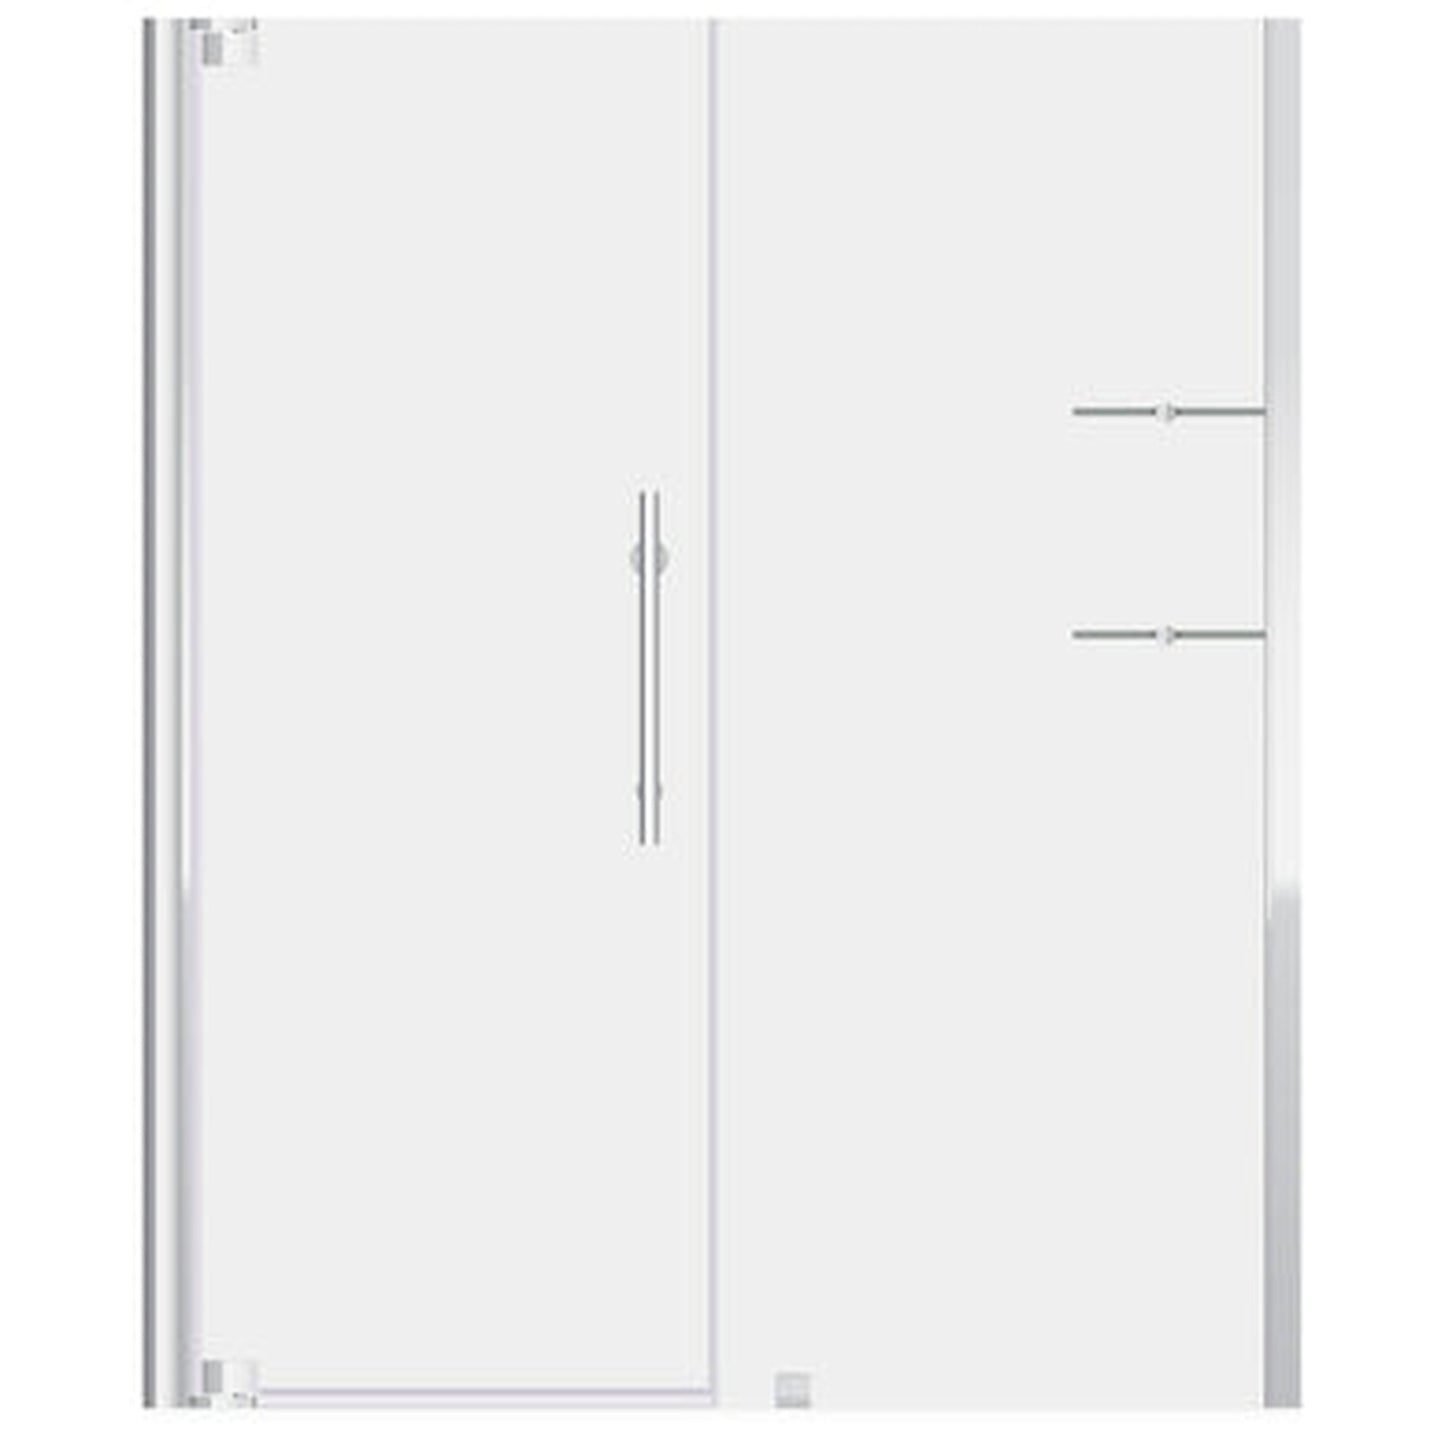 LessCare Ultra-G 63-65" x 72" Chrome Swing-Out Shower Door with 34" Side Panel